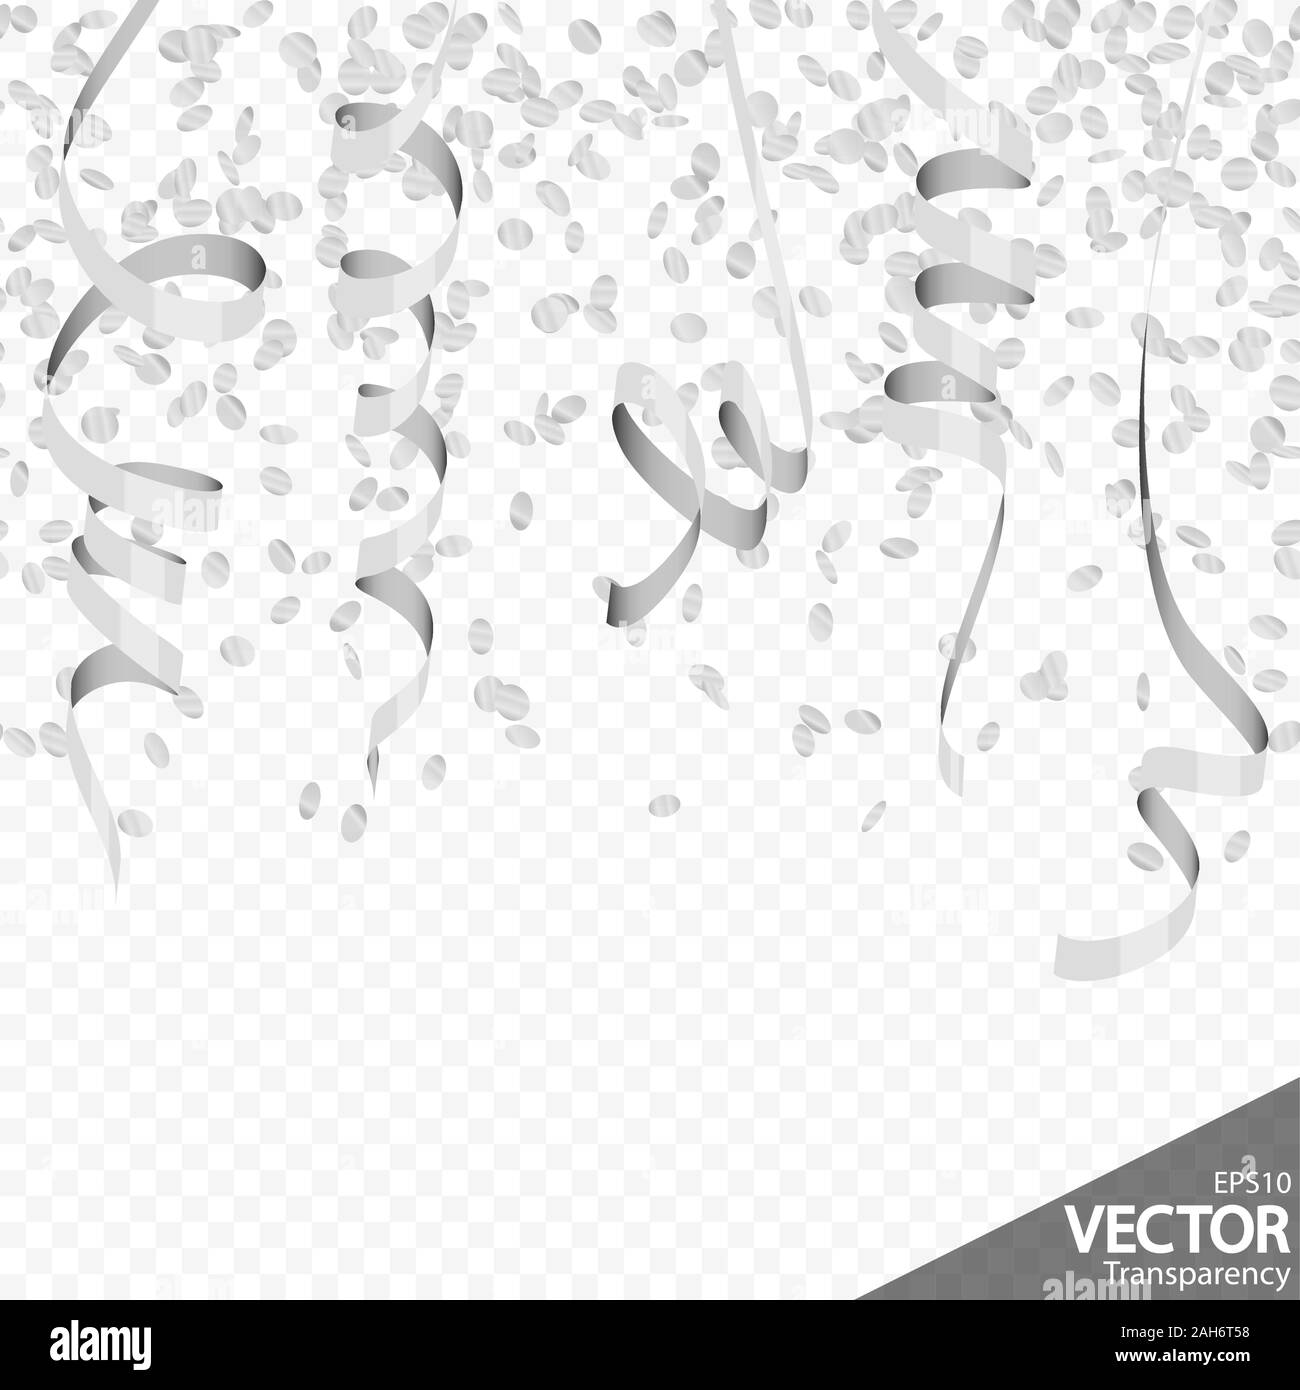 Paper streamer Black and White Stock Photos & Images - Alamy